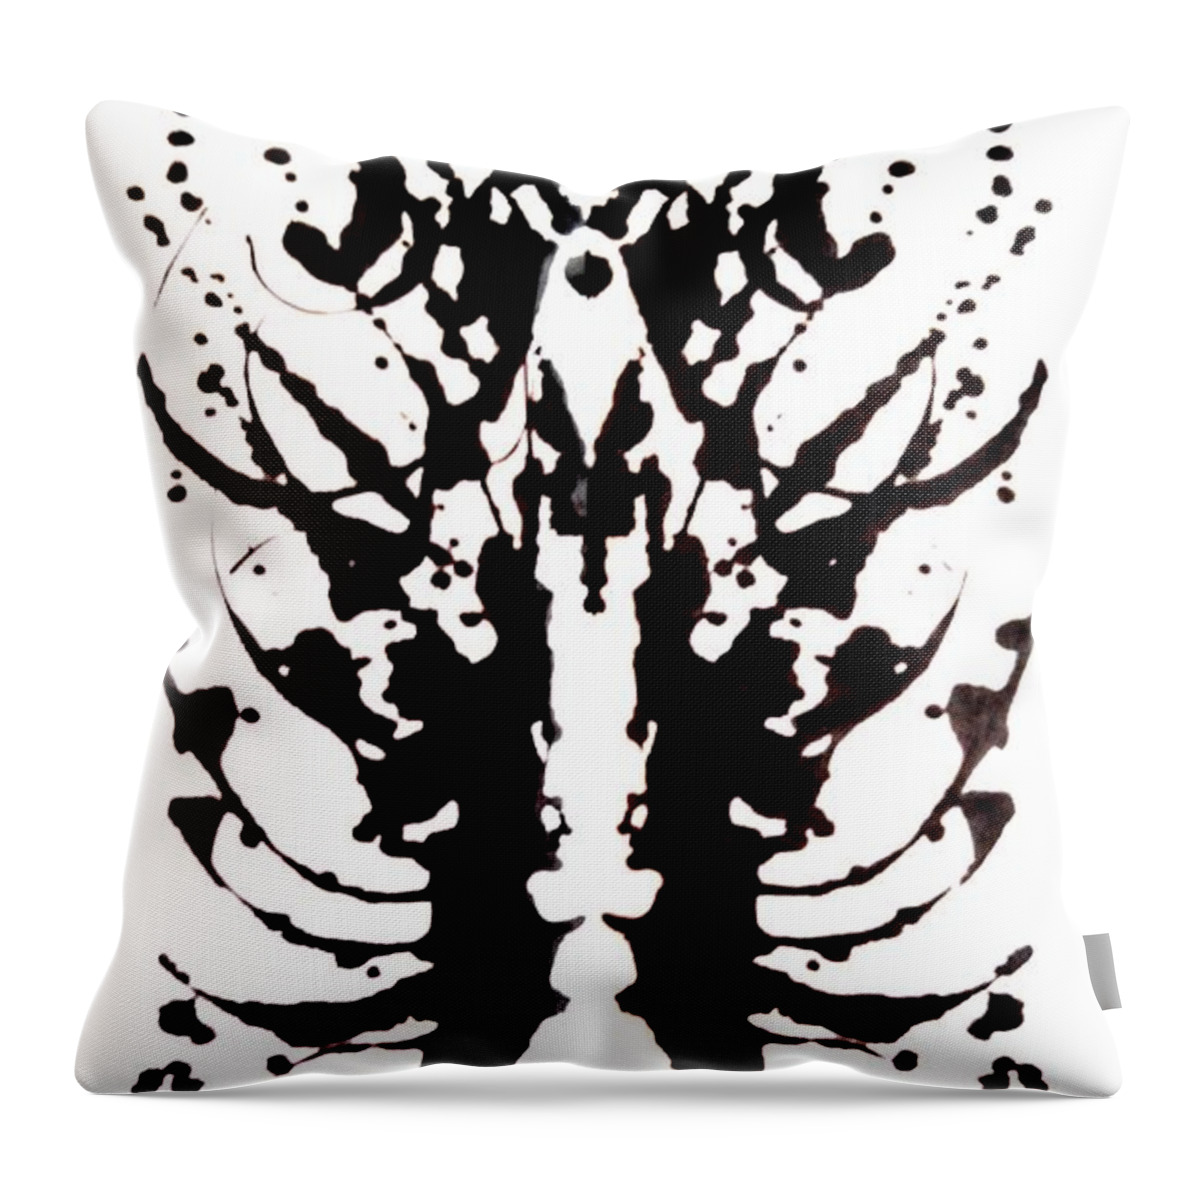 Statement Throw Pillow featuring the painting Energy Bug Zapper by Stephenie Zagorski